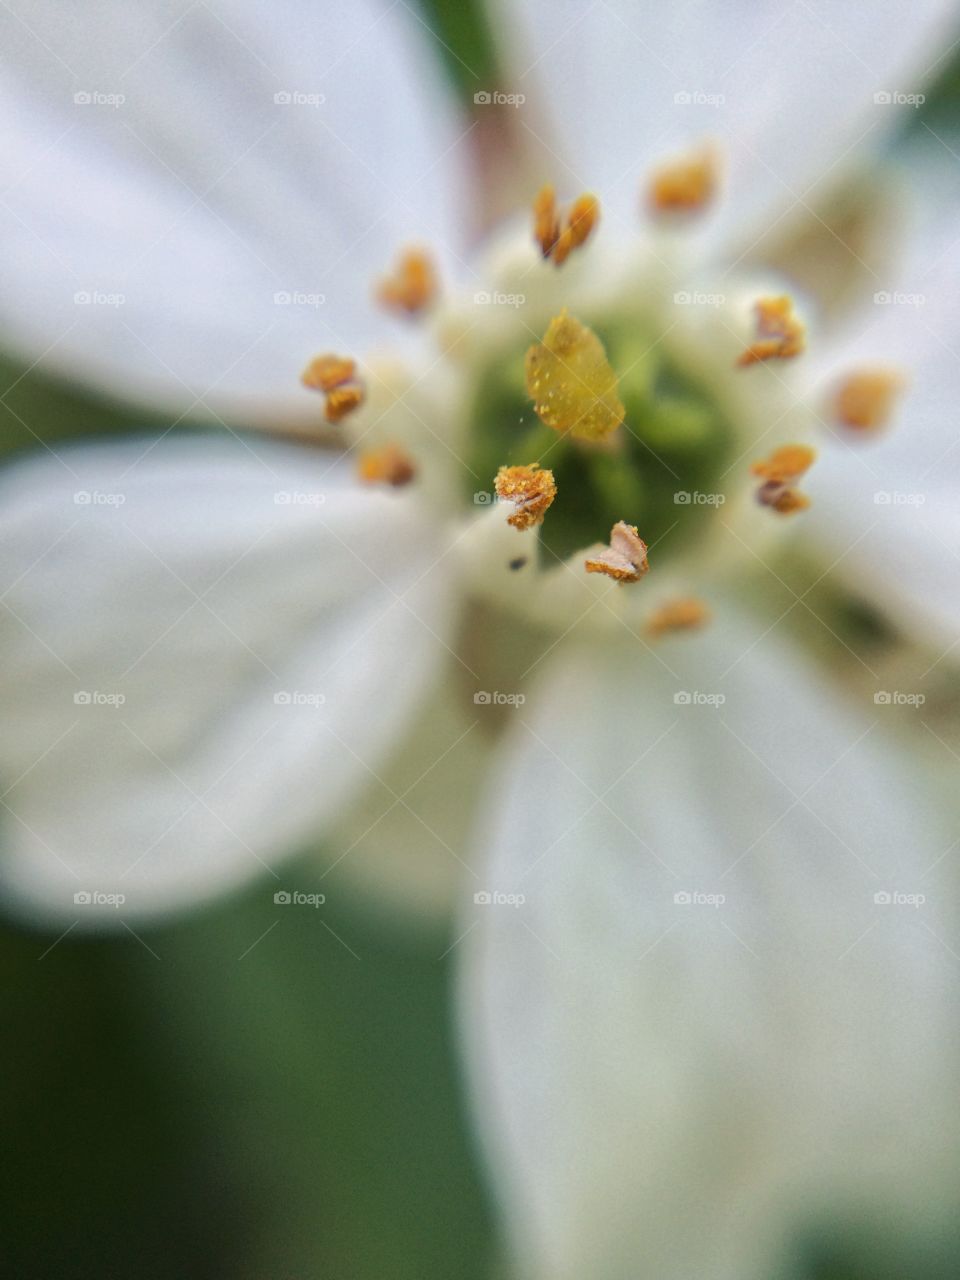 Extreme close-up of white flower